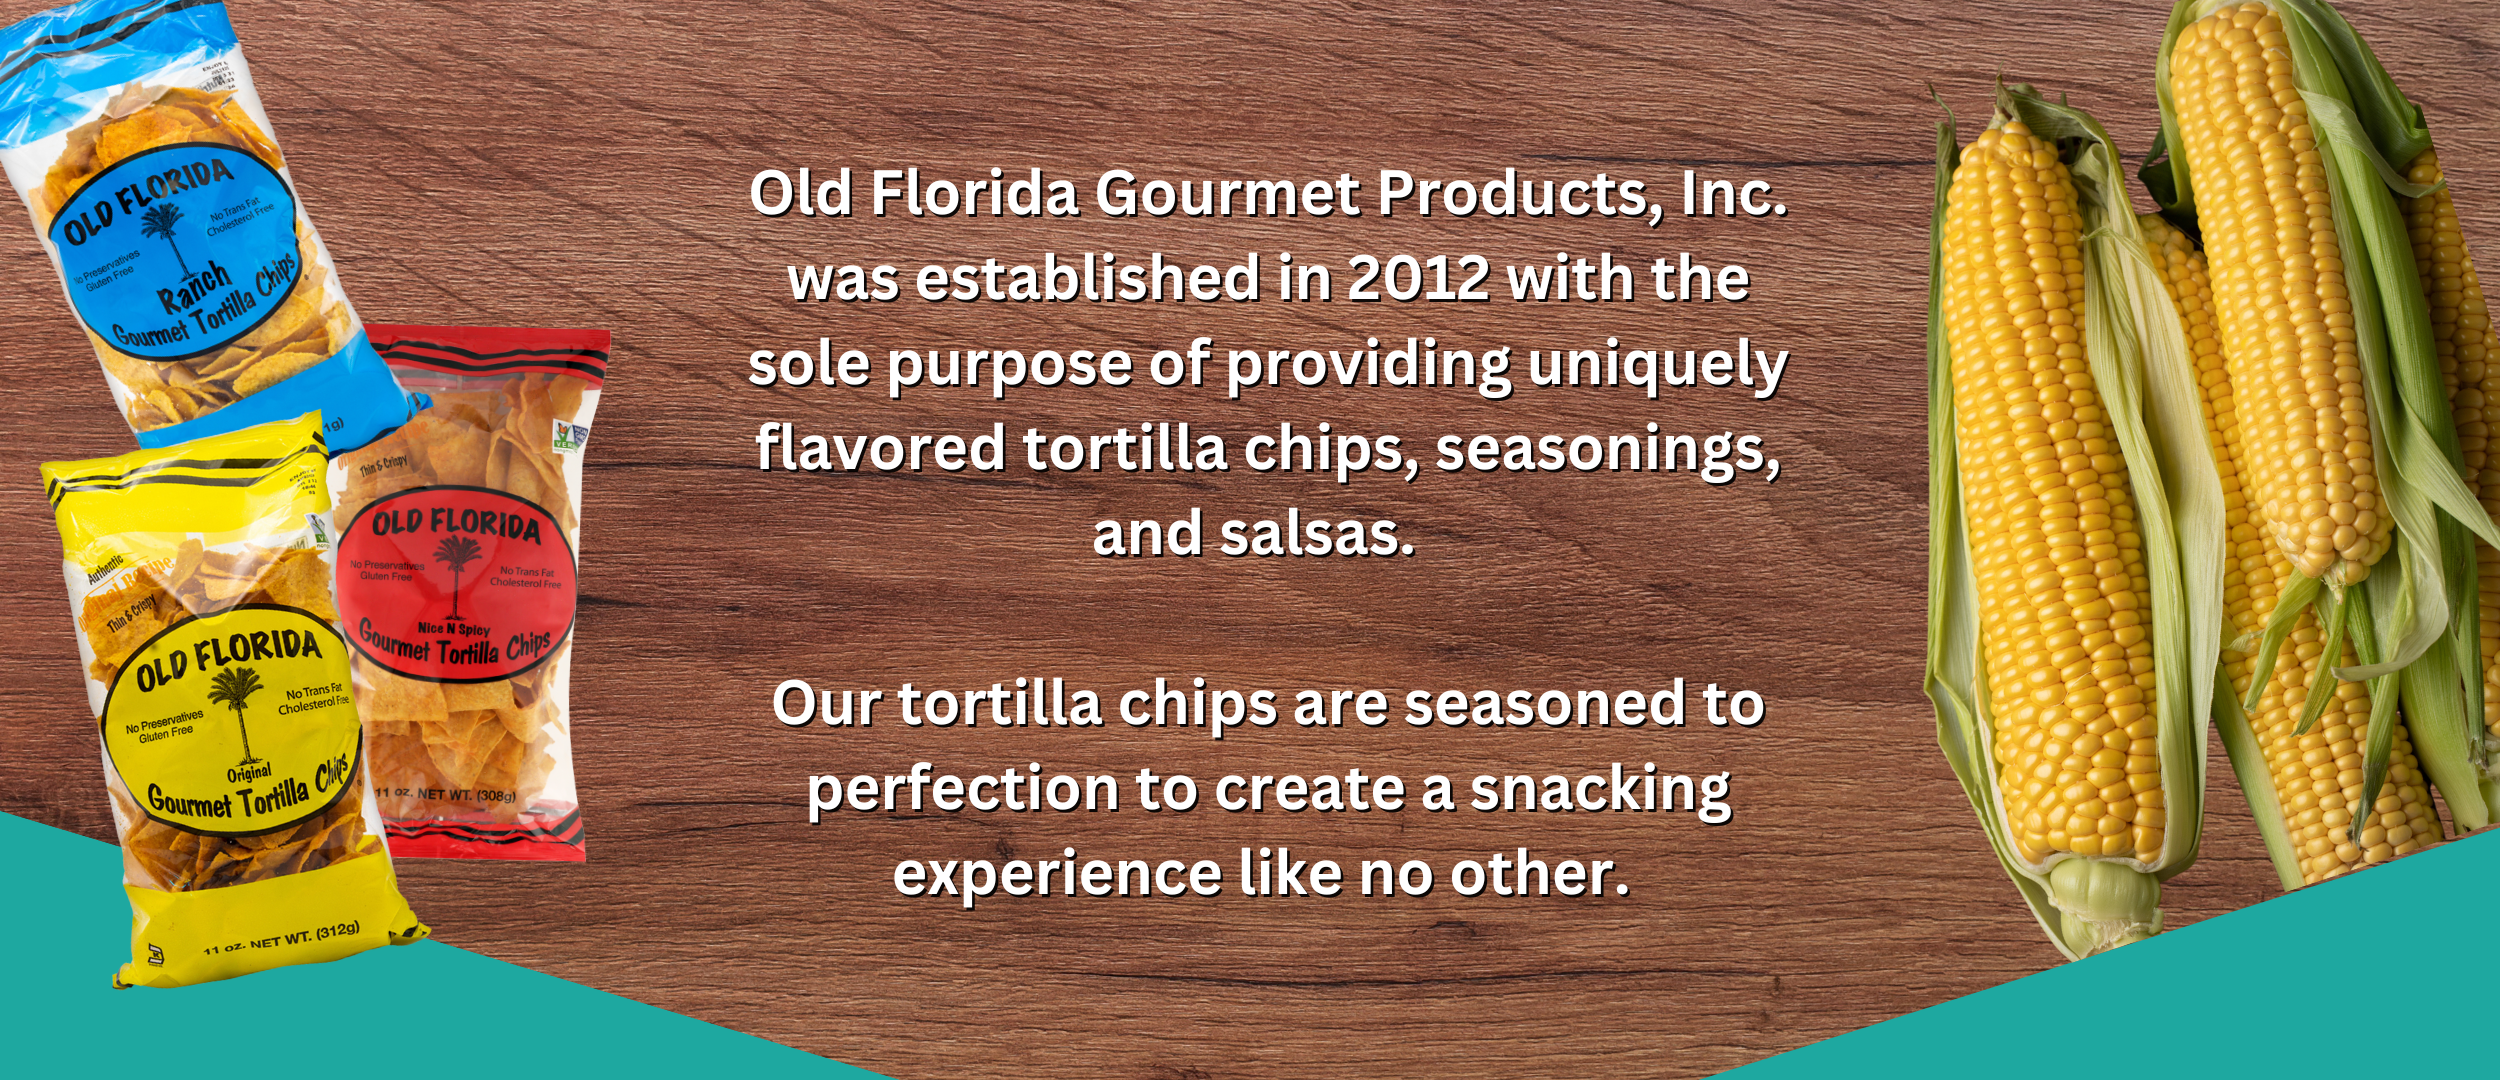 Old Florida Gourmet Products, Inc. was established in 2012 with the sole purpose of providing uniquely flavored tortilla chips, seasonings, and salsas. Our tortilla chips are seasoned to perfection to create a snacking experience like no other.